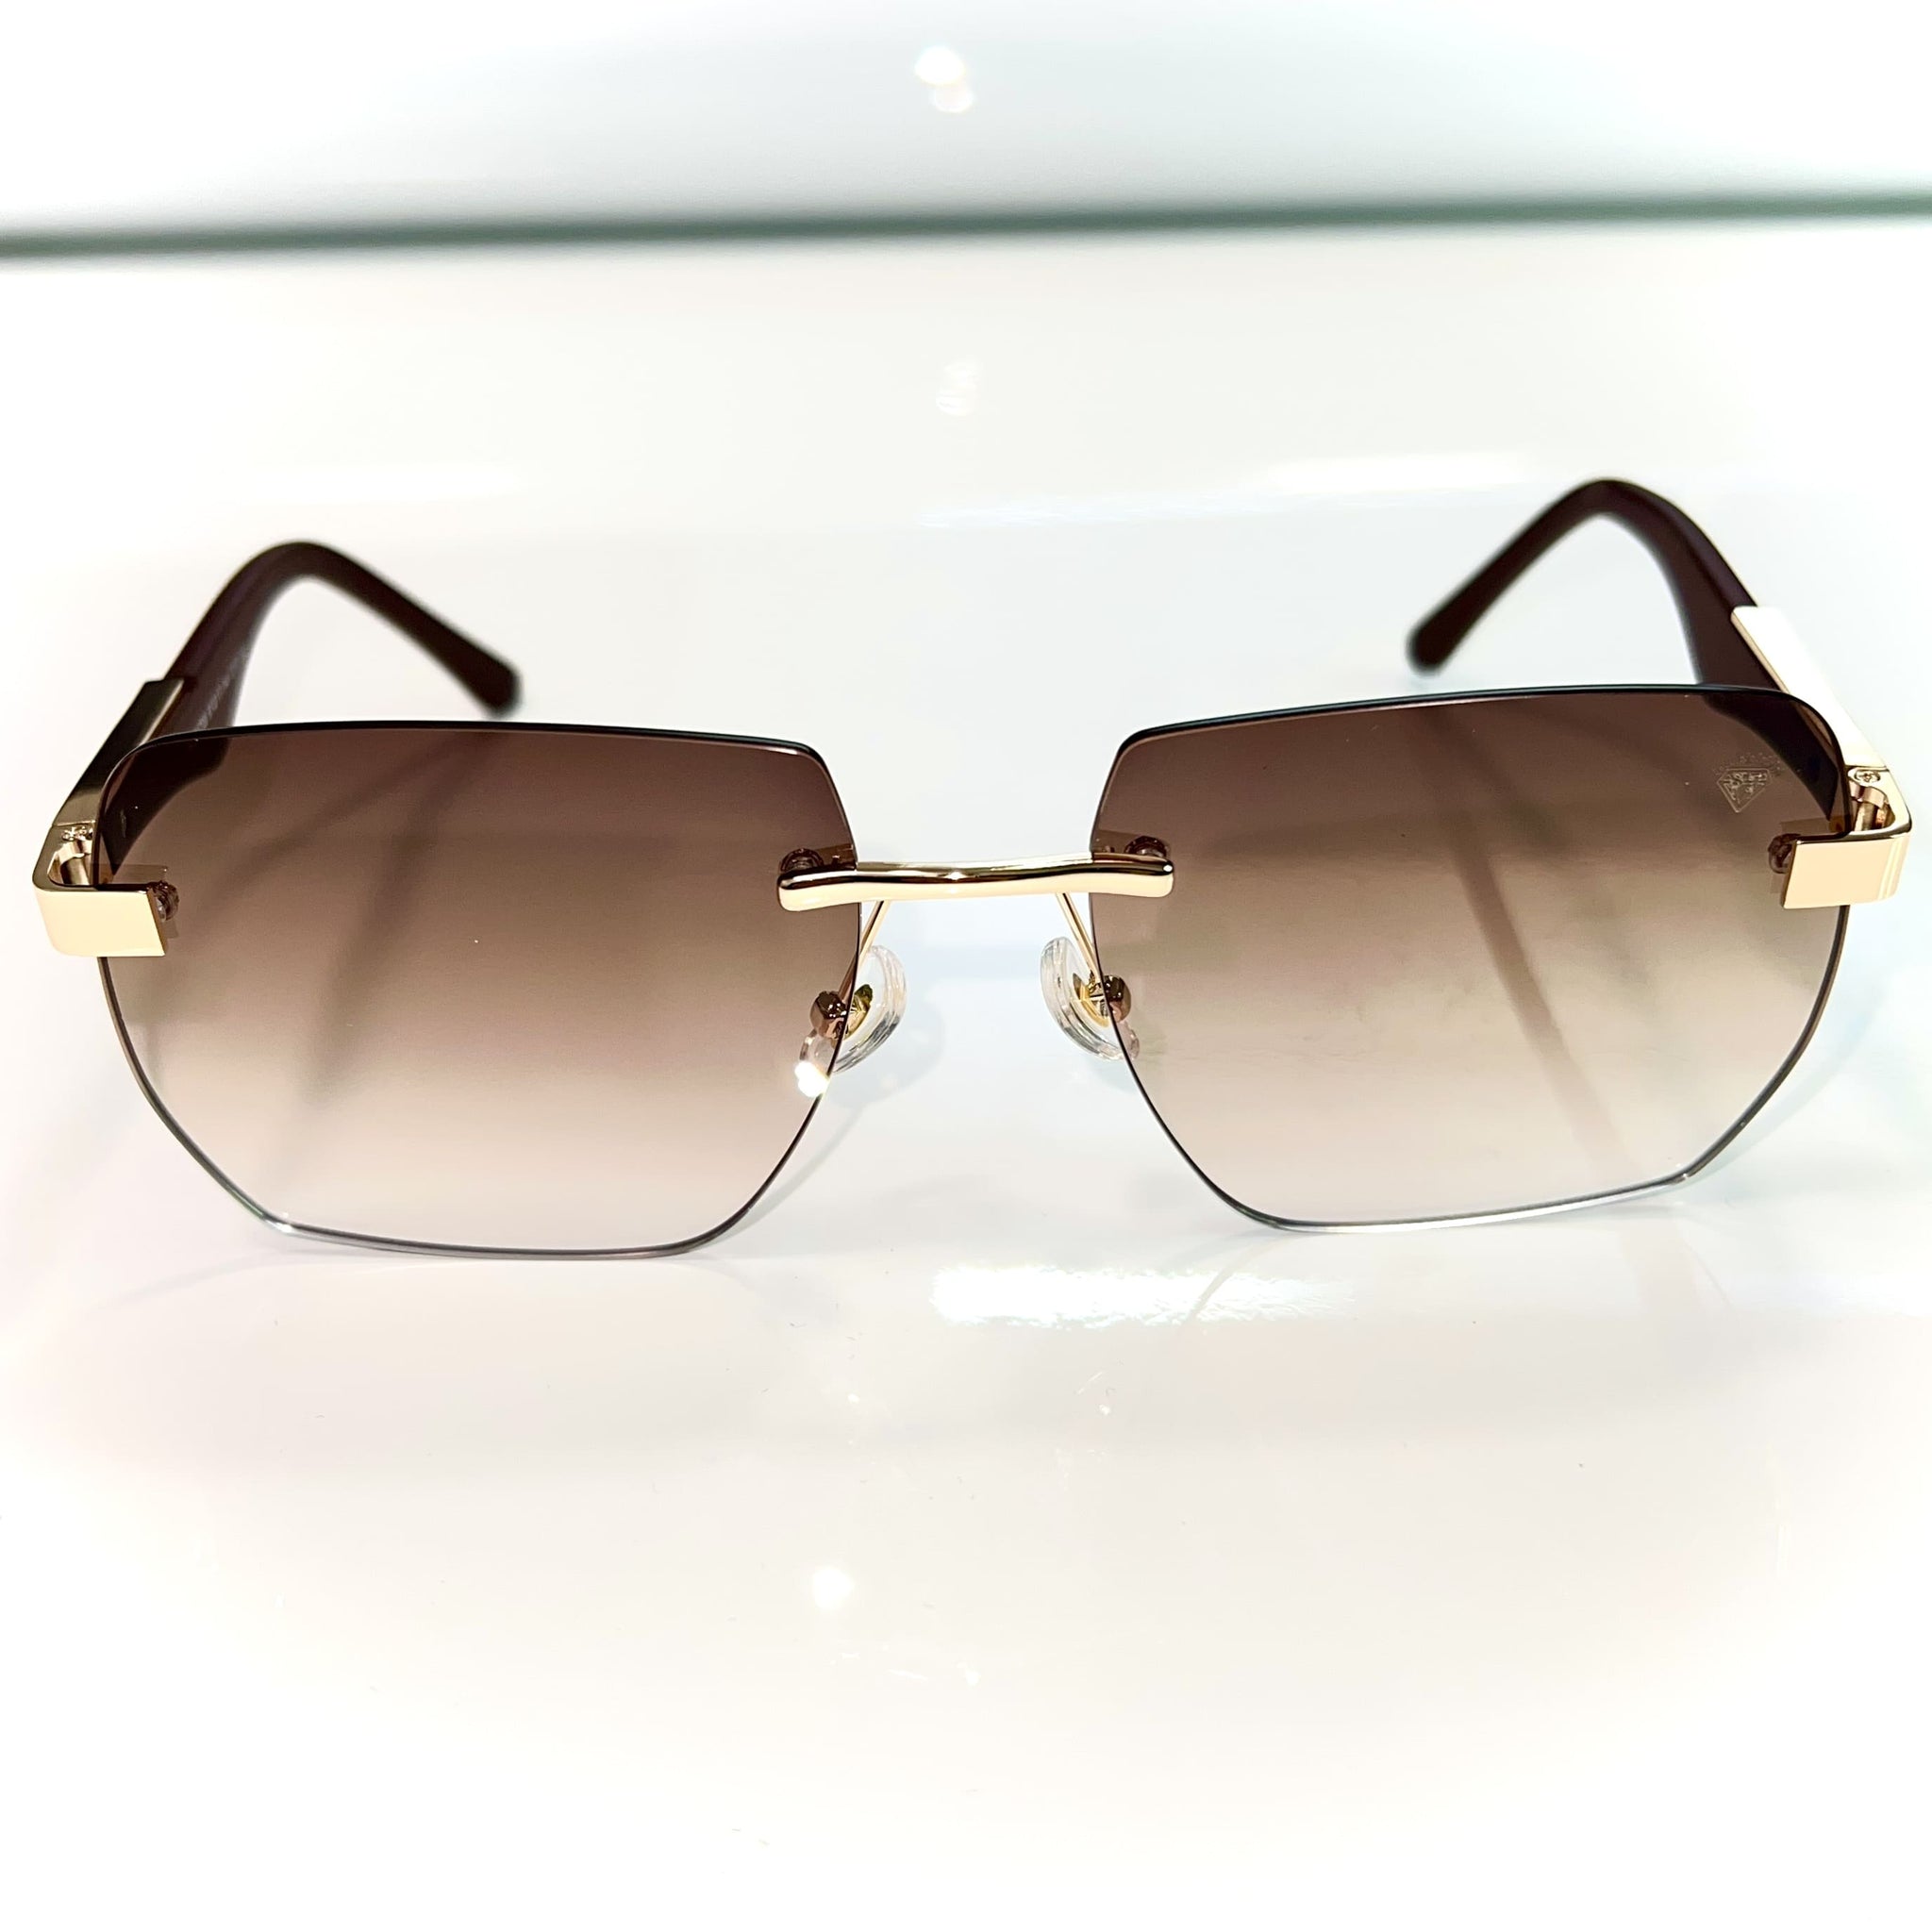 Dubai Glasses - 14 carat gold plated / Silicon side - Brown Shade - Sehgal Glasses